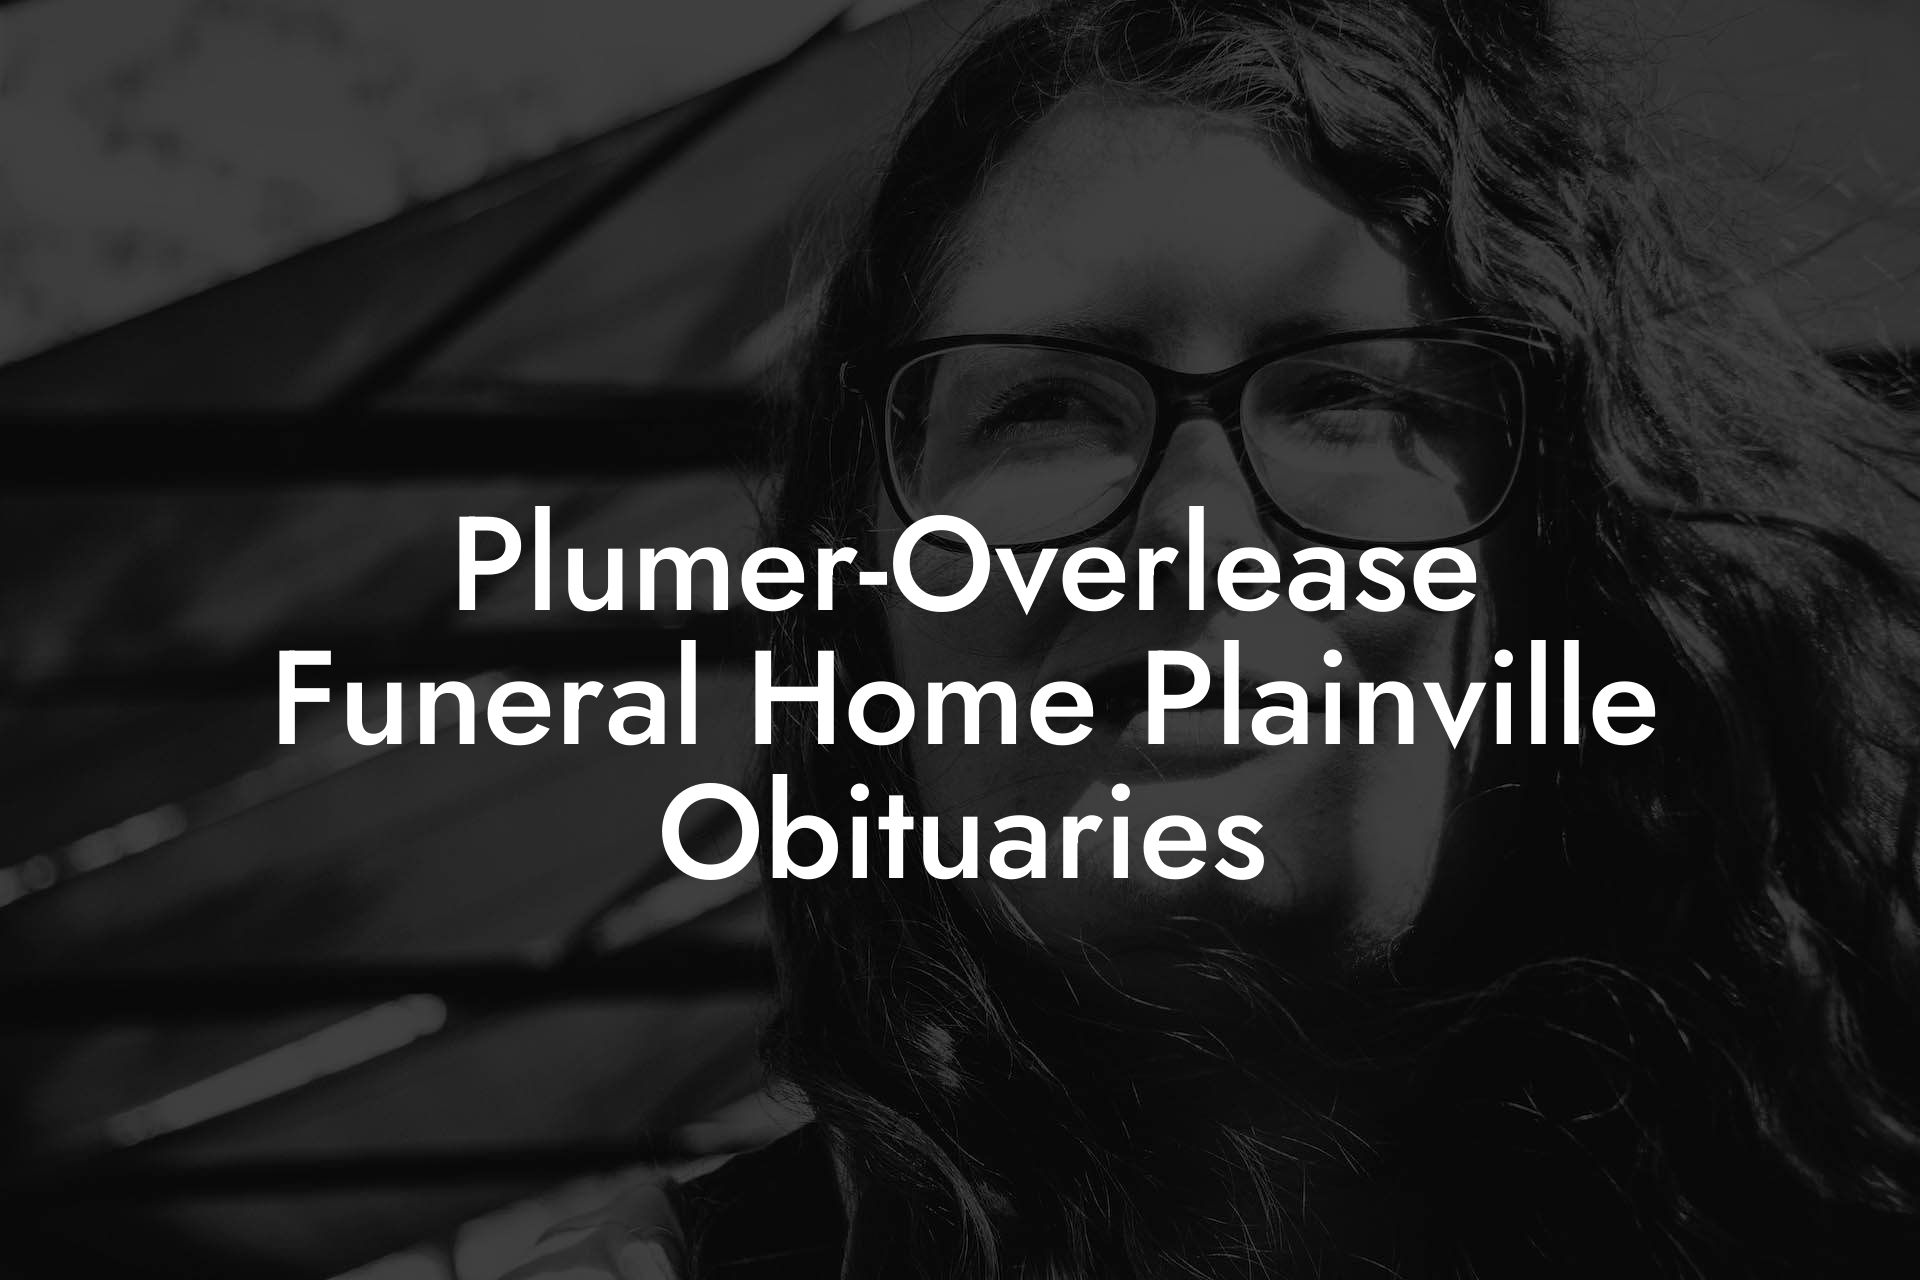 Plumer-Overlease Funeral Home Plainville Obituaries